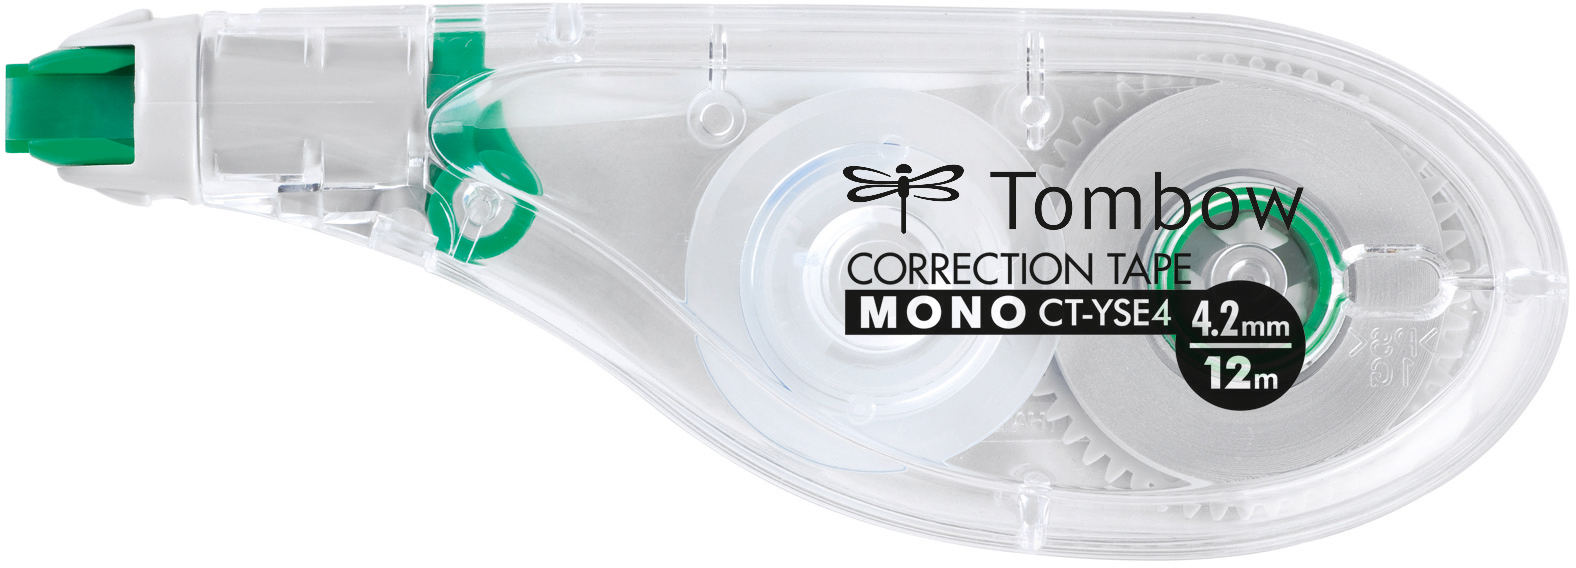 TOMBOW Roller de correction Mon CT-YSE4 4,2mmx12m